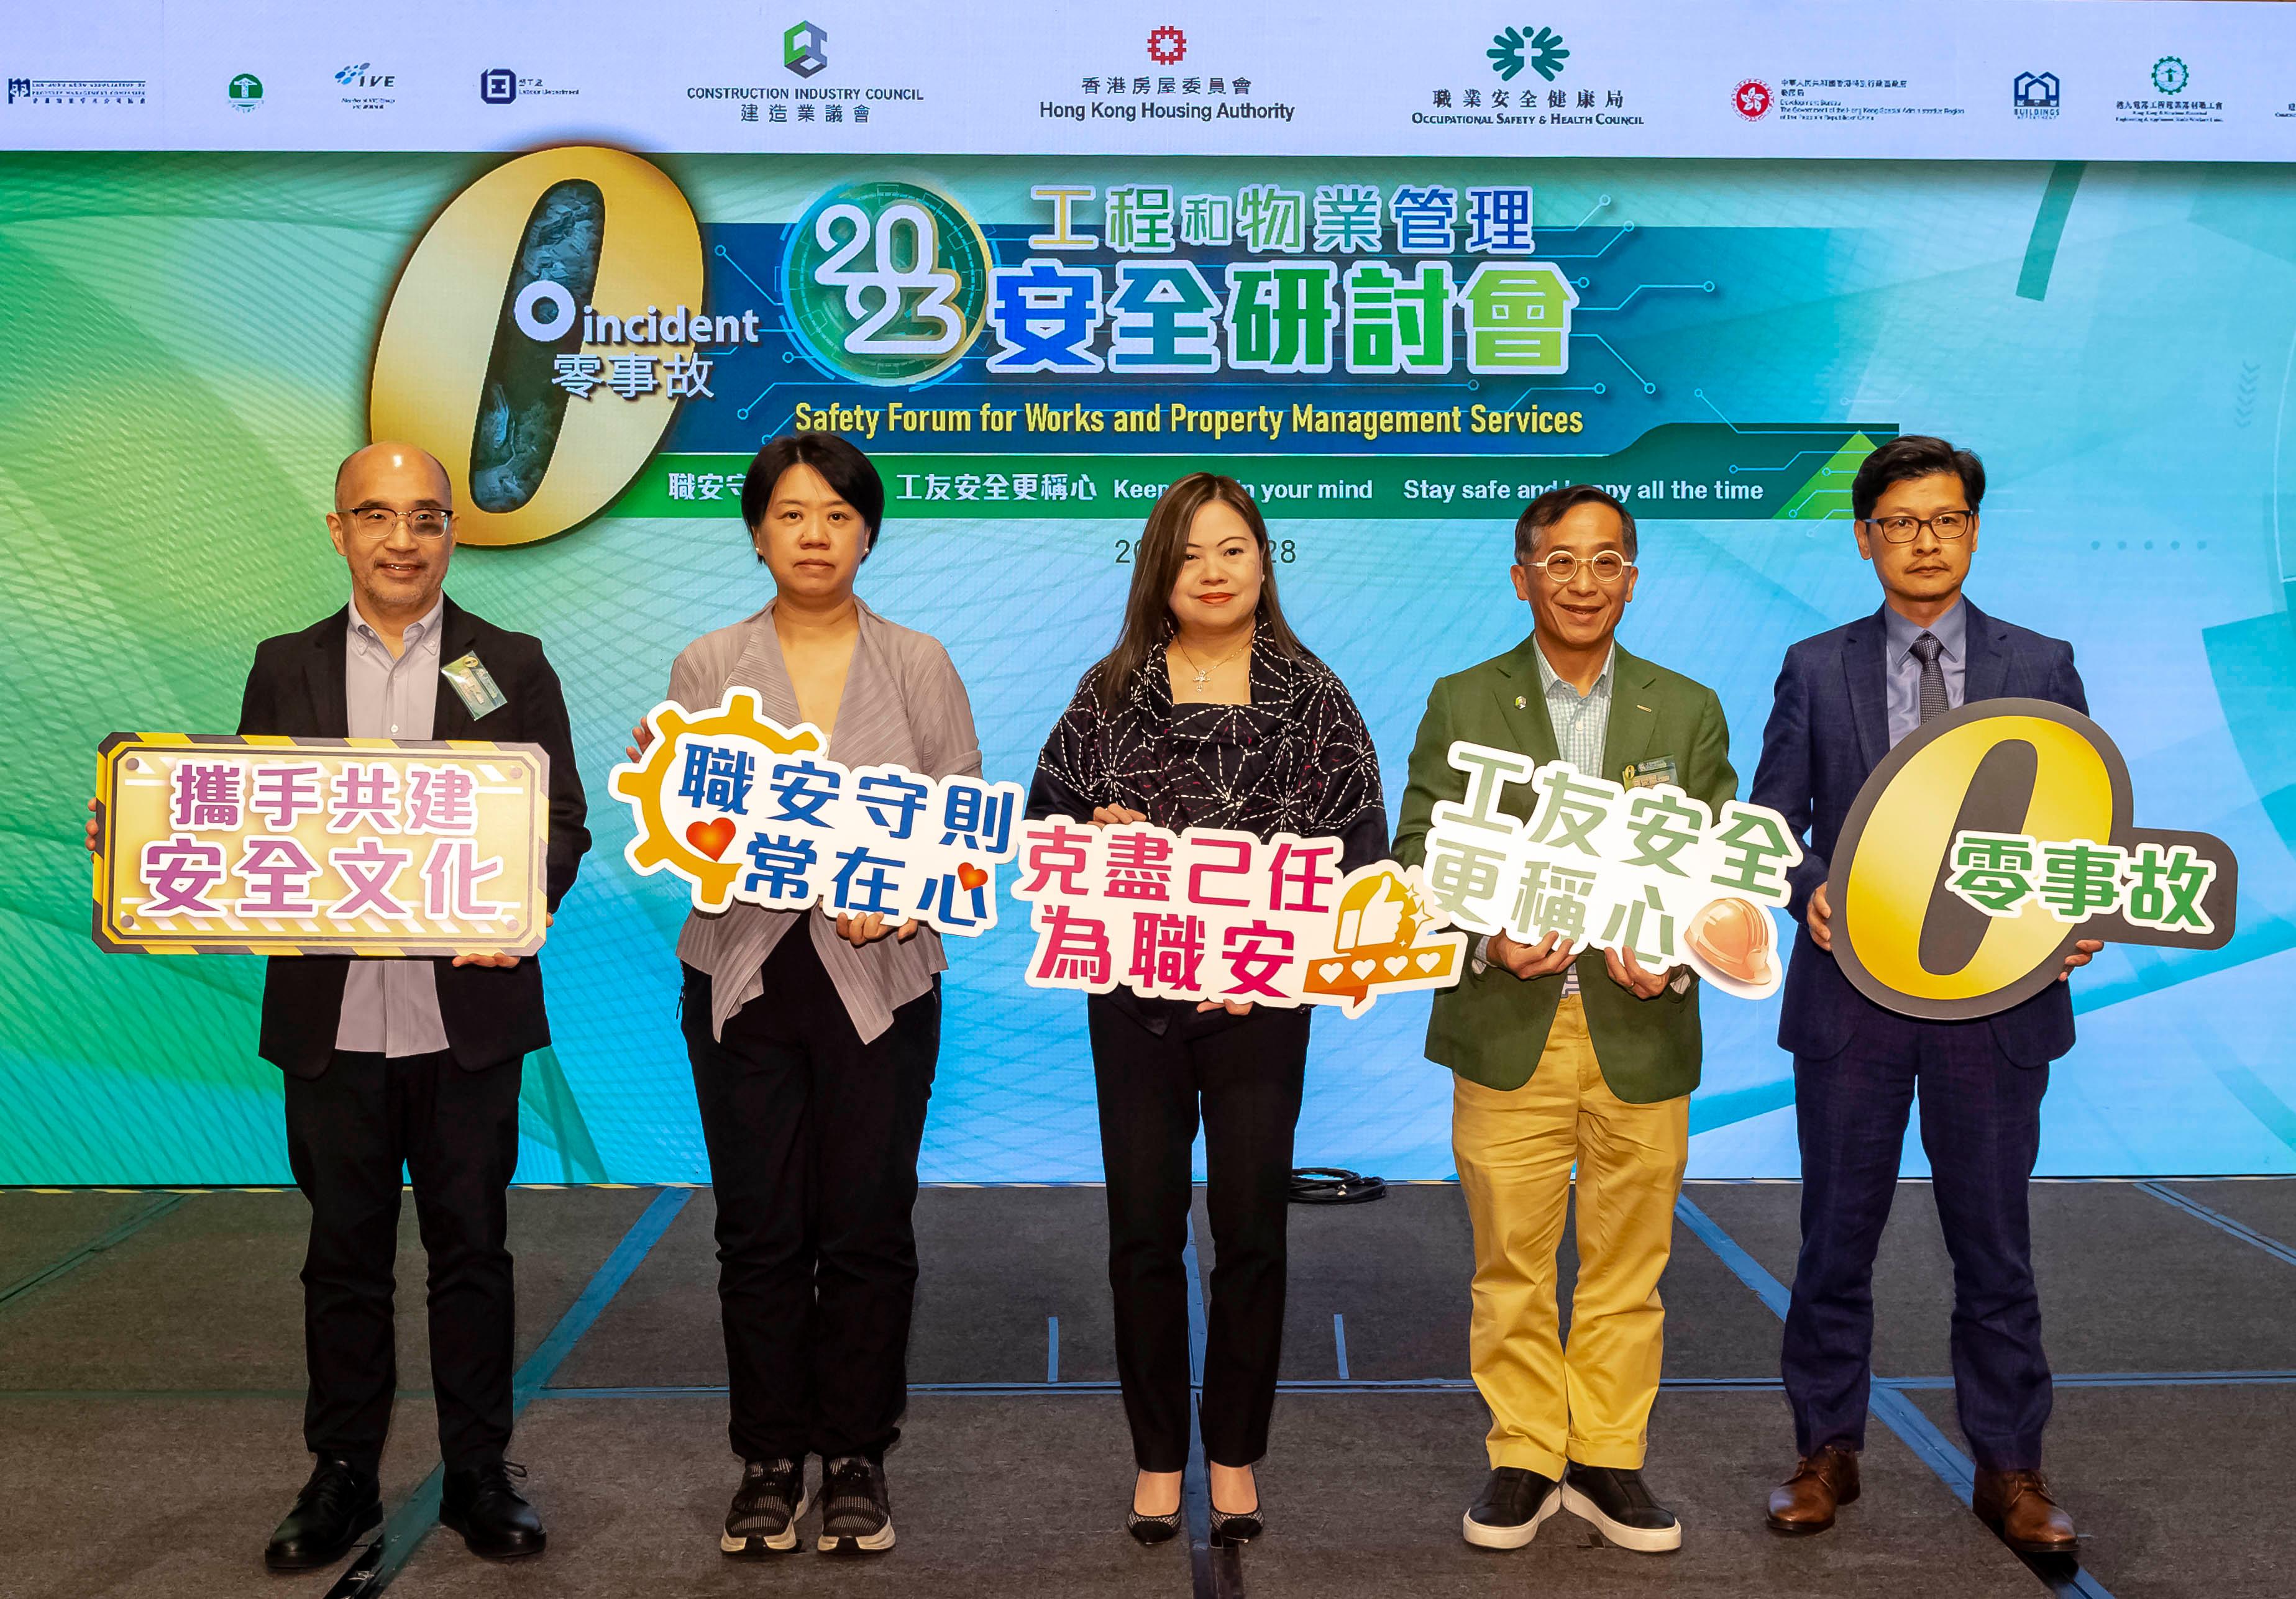 The Permanent Secretary for Housing, Miss Rosanna Law (centre), joined forces with the Executive Director of the Occupational Safety and Health Council, Ms Bonnie Yau (second left); the Chairman of the Counstruction Industry Council, Mr Thomas Ho (second right); the Deputy Director of Housing (Development and Construction), Mr Stephen Leung (first left); and the Deputy Director of Housing (Estate Management), Mr Ricky Yeung (first right) to promote site safety messages at the Safety Forum for Works and Property Management Services 2023 today (September 28).